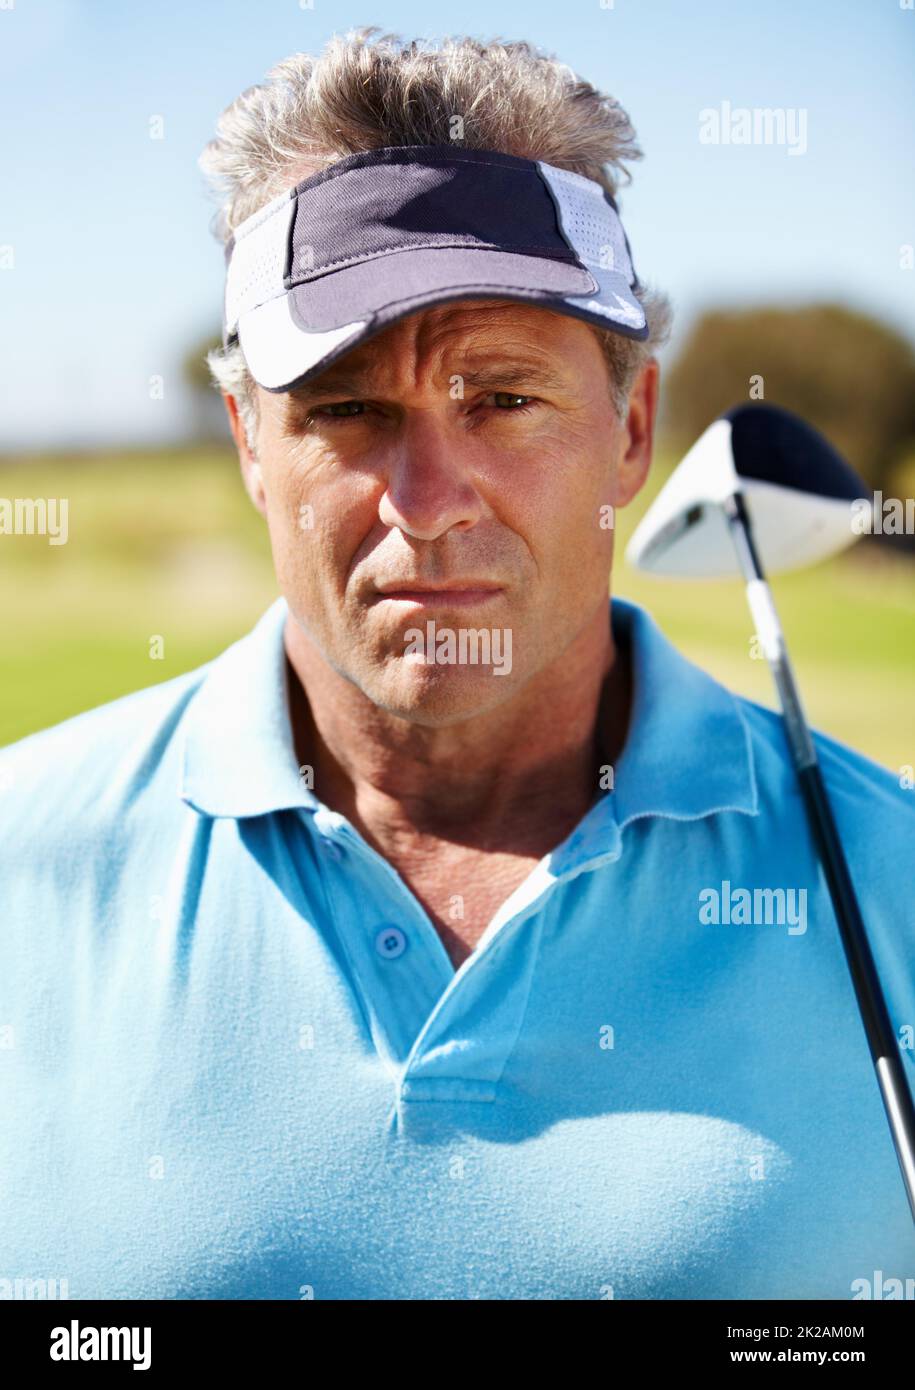 Serious about golf. Head and shoulders portrait of a mature golfer with his club over his shoulder. Stock Photo